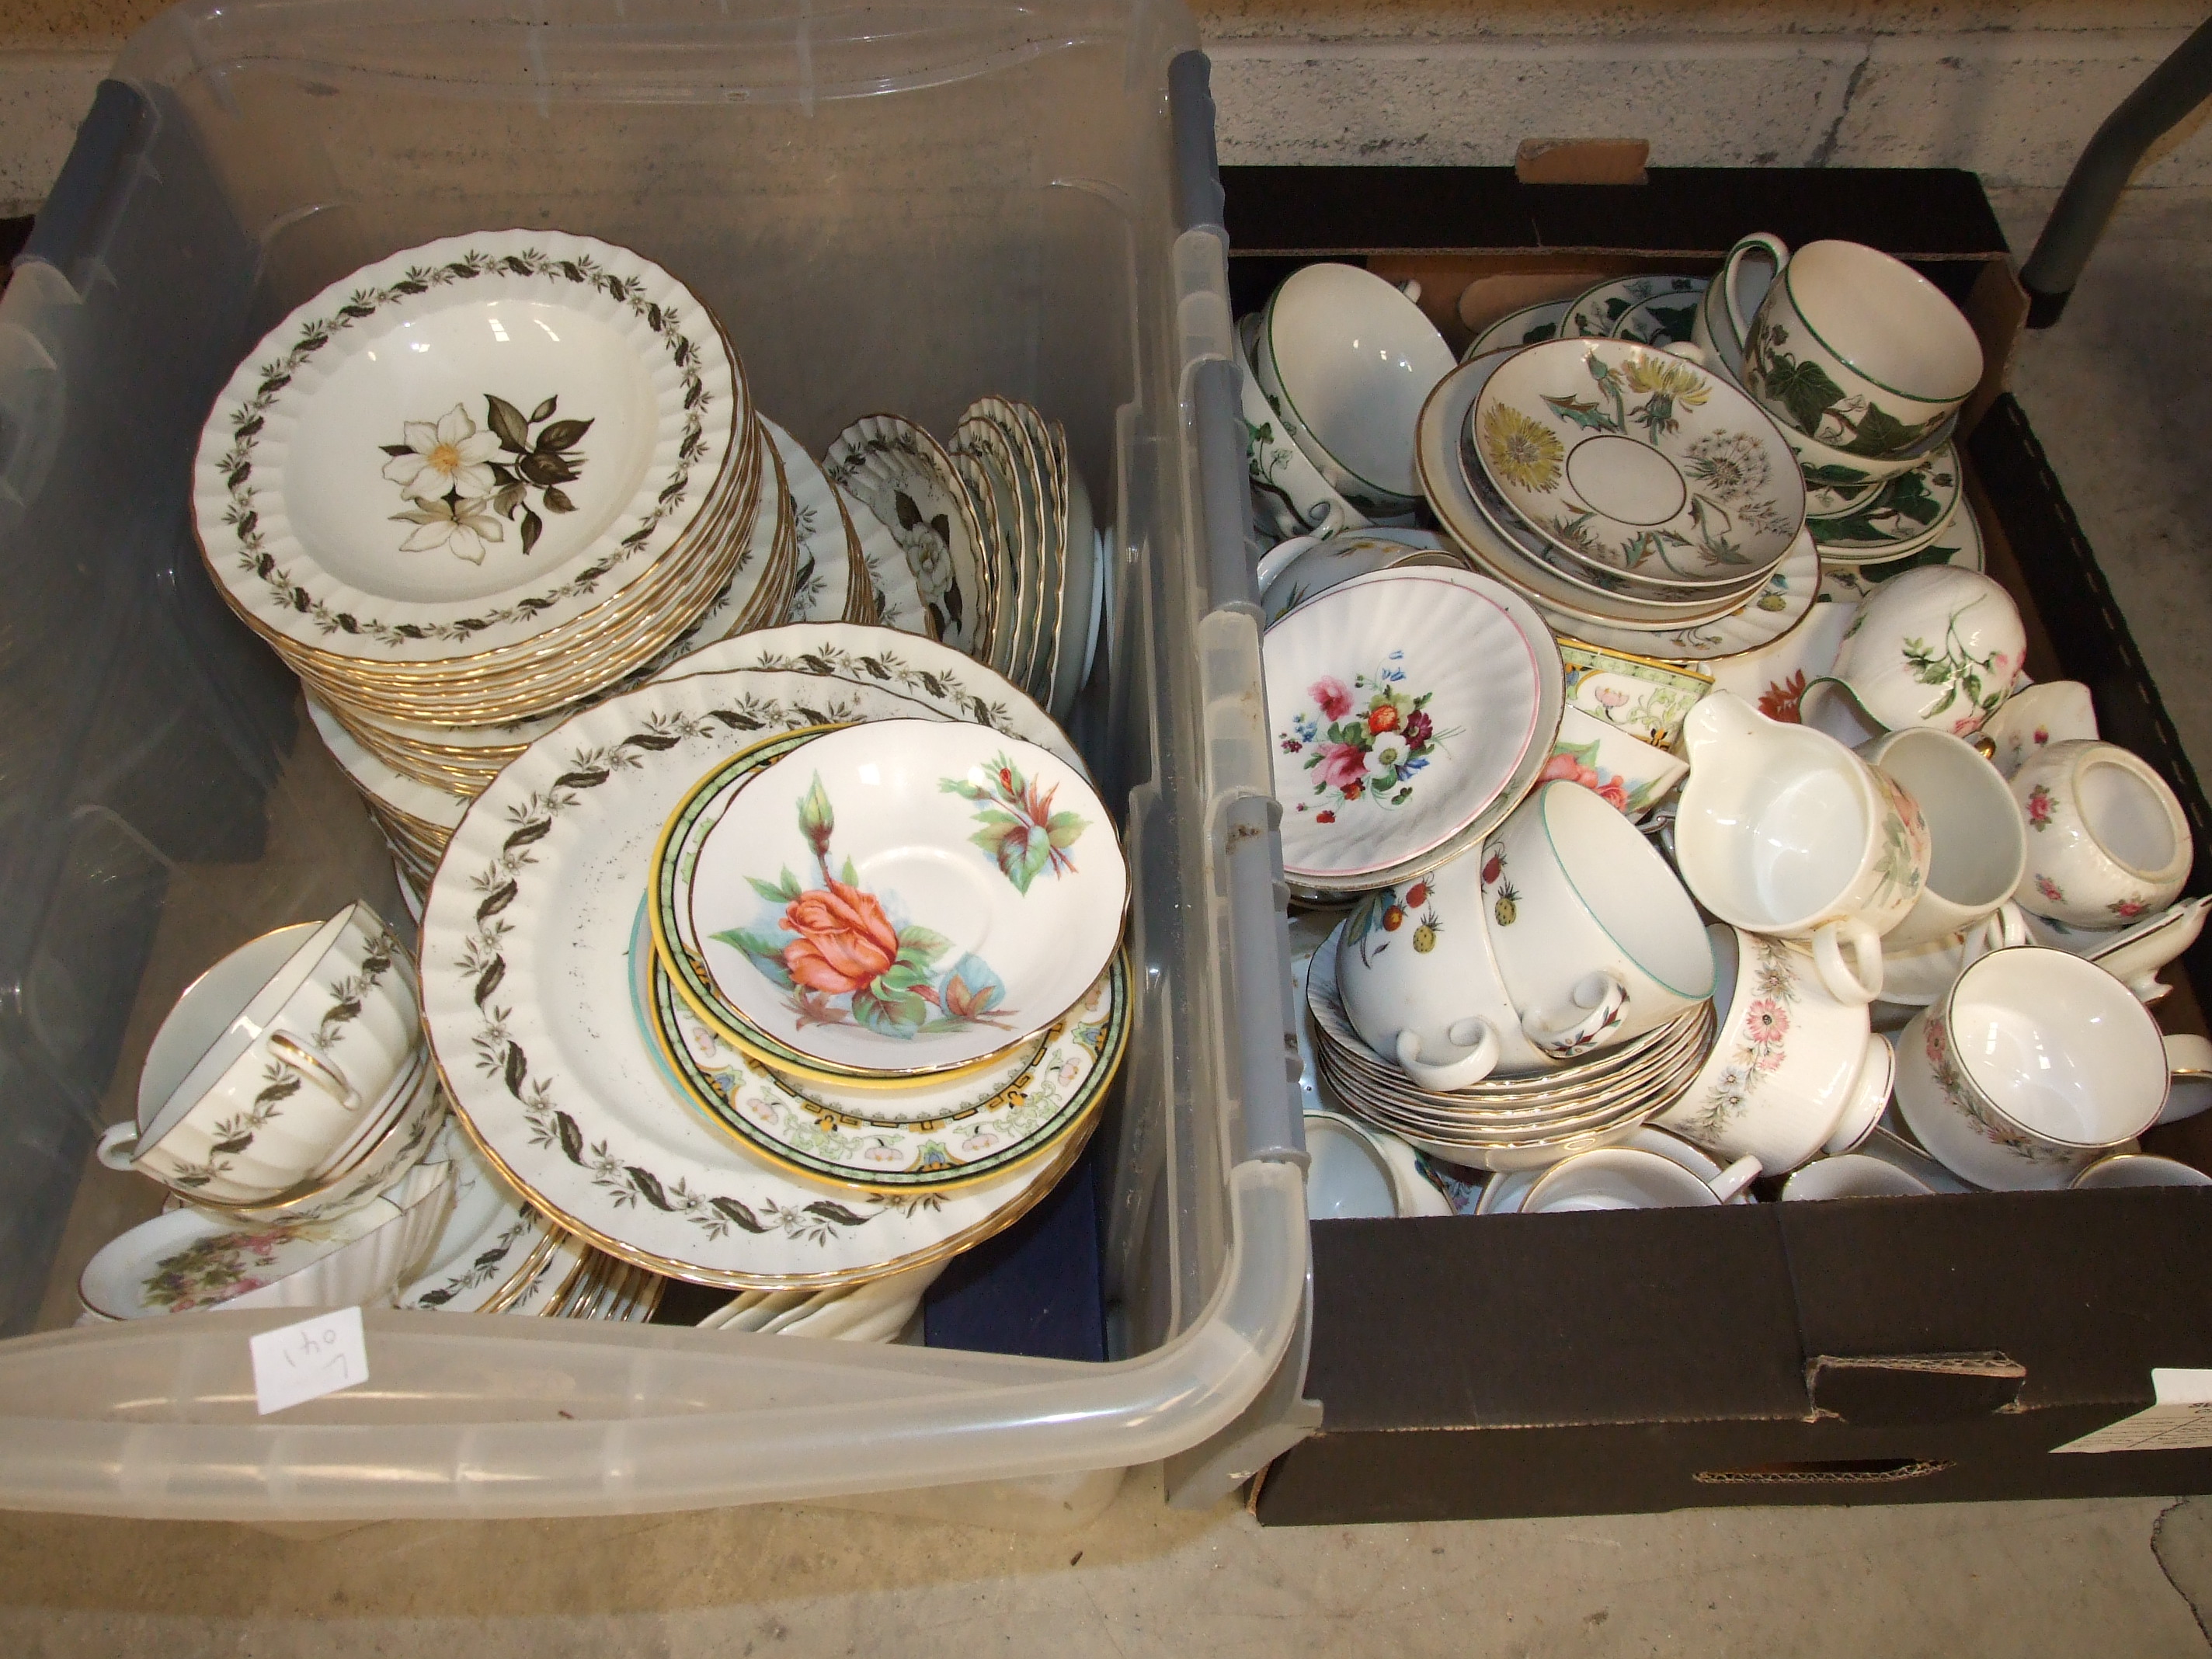 Approximately 60 pieces of Royal Worcester 'Engadine' pattern tea and dinnerware, 37 pieces of - Image 2 of 2